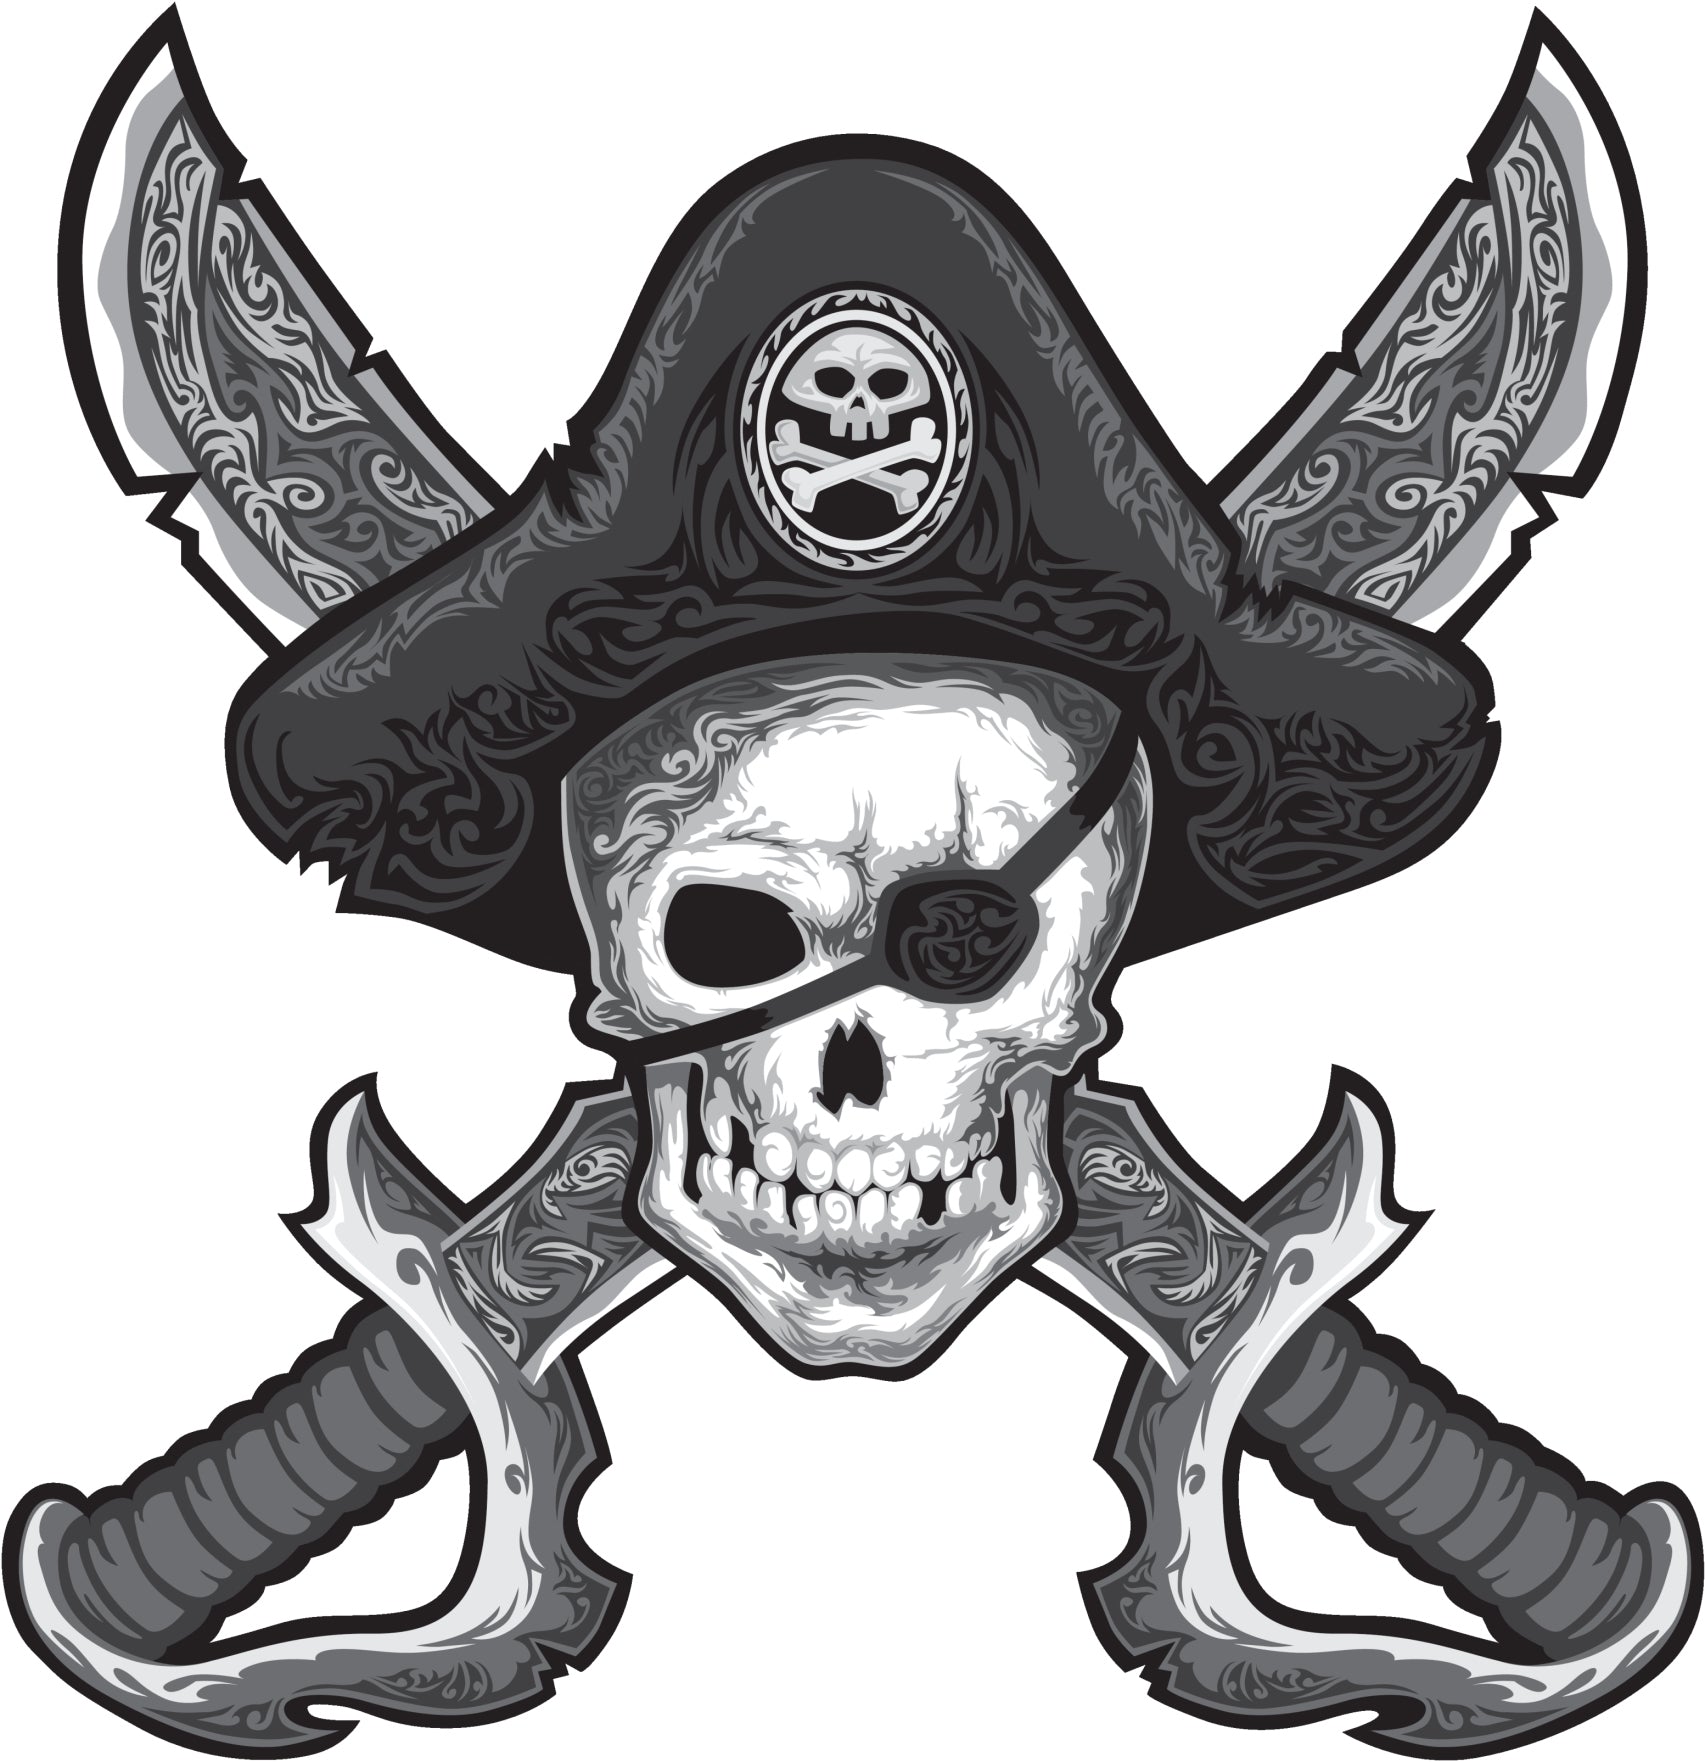 PIRATE JOLLY ROGER SKULL AND CROSS BONES SWORDS WITH EYE PATCH AND HAT BLACK WHITE GREY Vinyl Decal Sticker